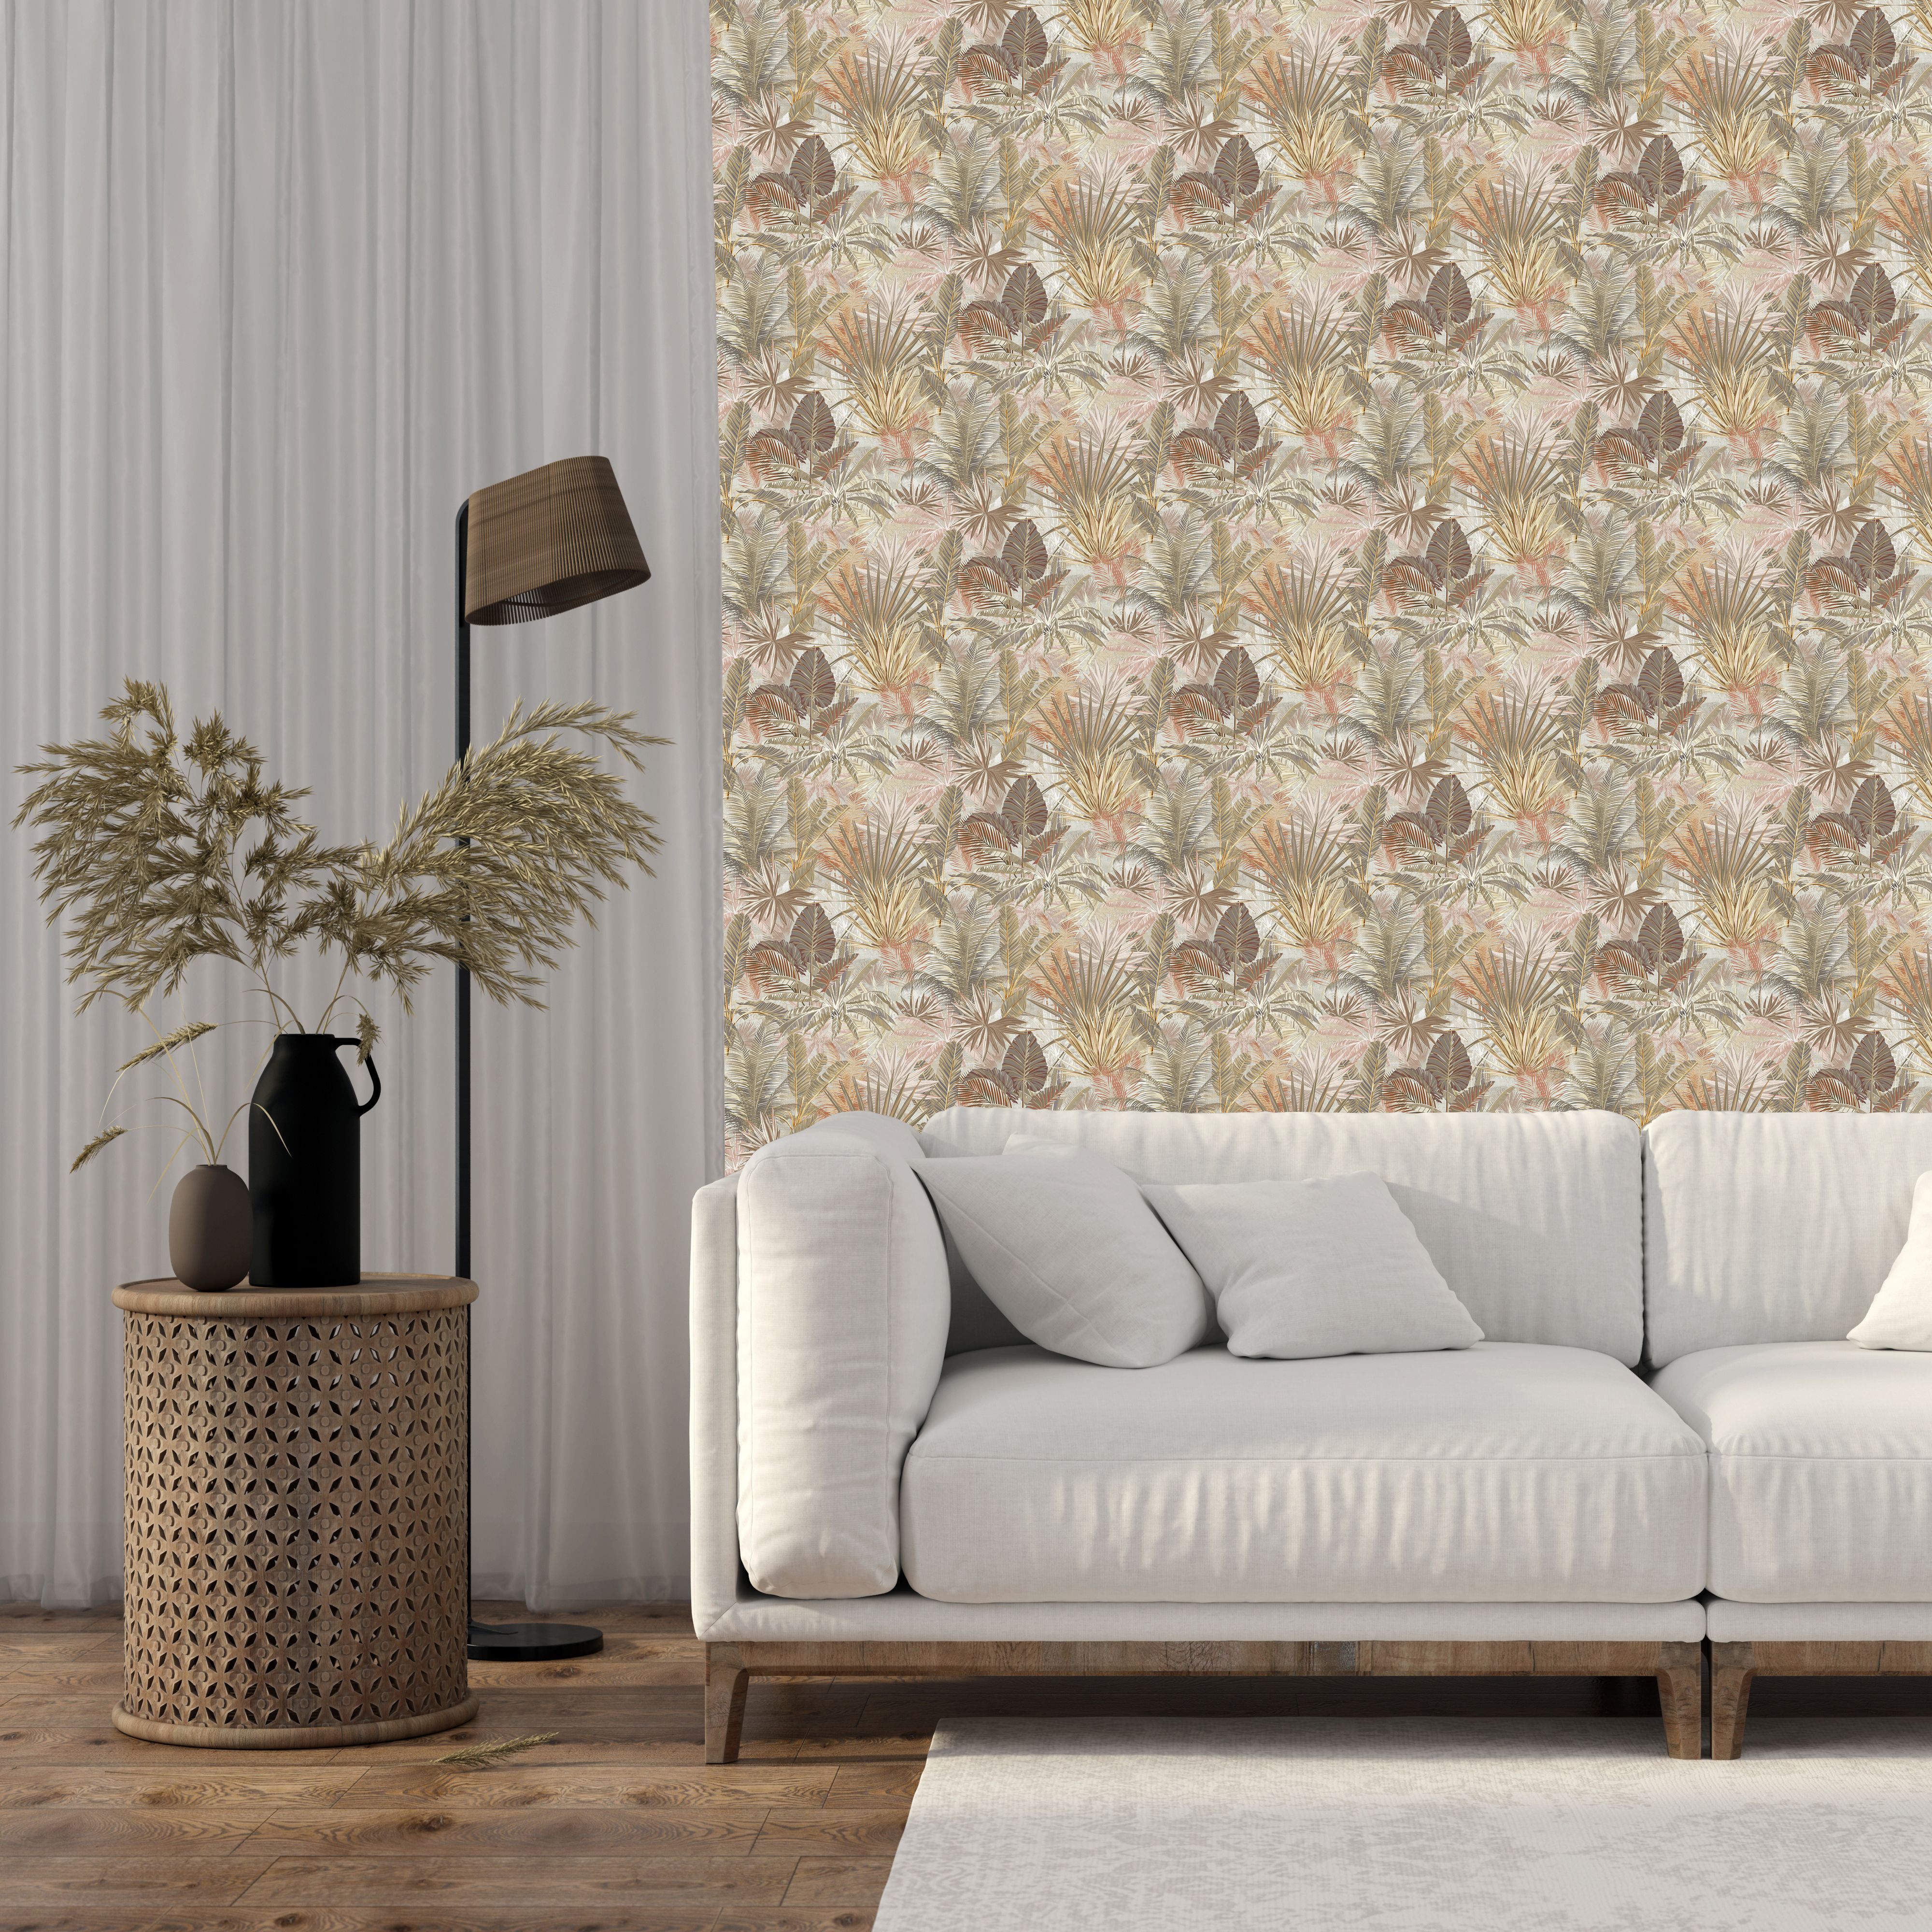 GoodHome Dioman Beige Tropical leaves Textured Wallpaper